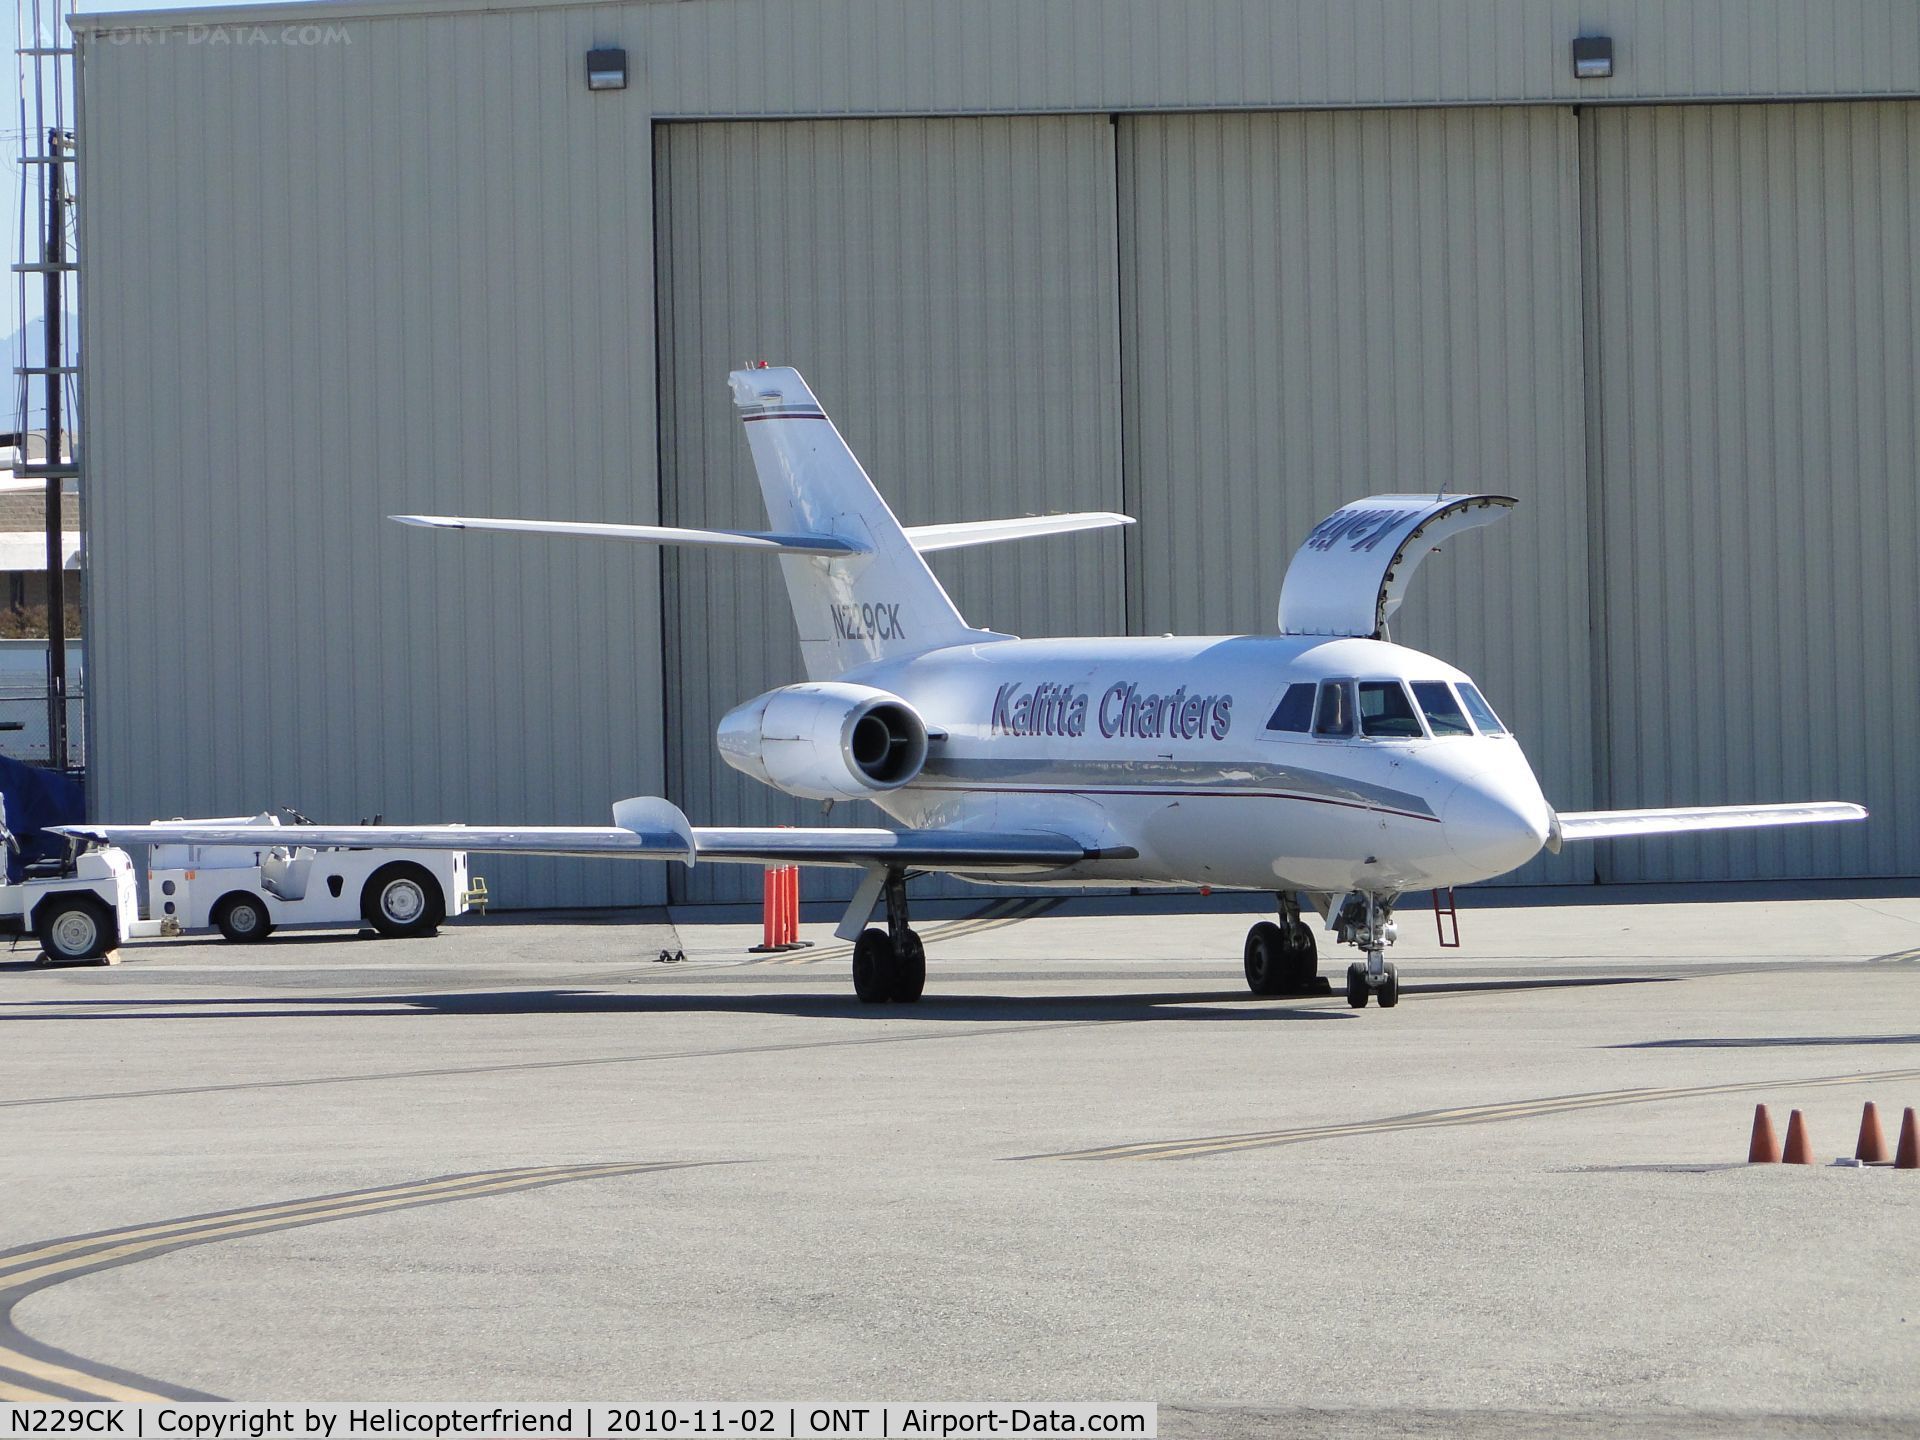 N229CK, 1970 Dassault Fan Jet Falcon (20D) C/N 229, Appears to being readied for flight on the southside of Ontario